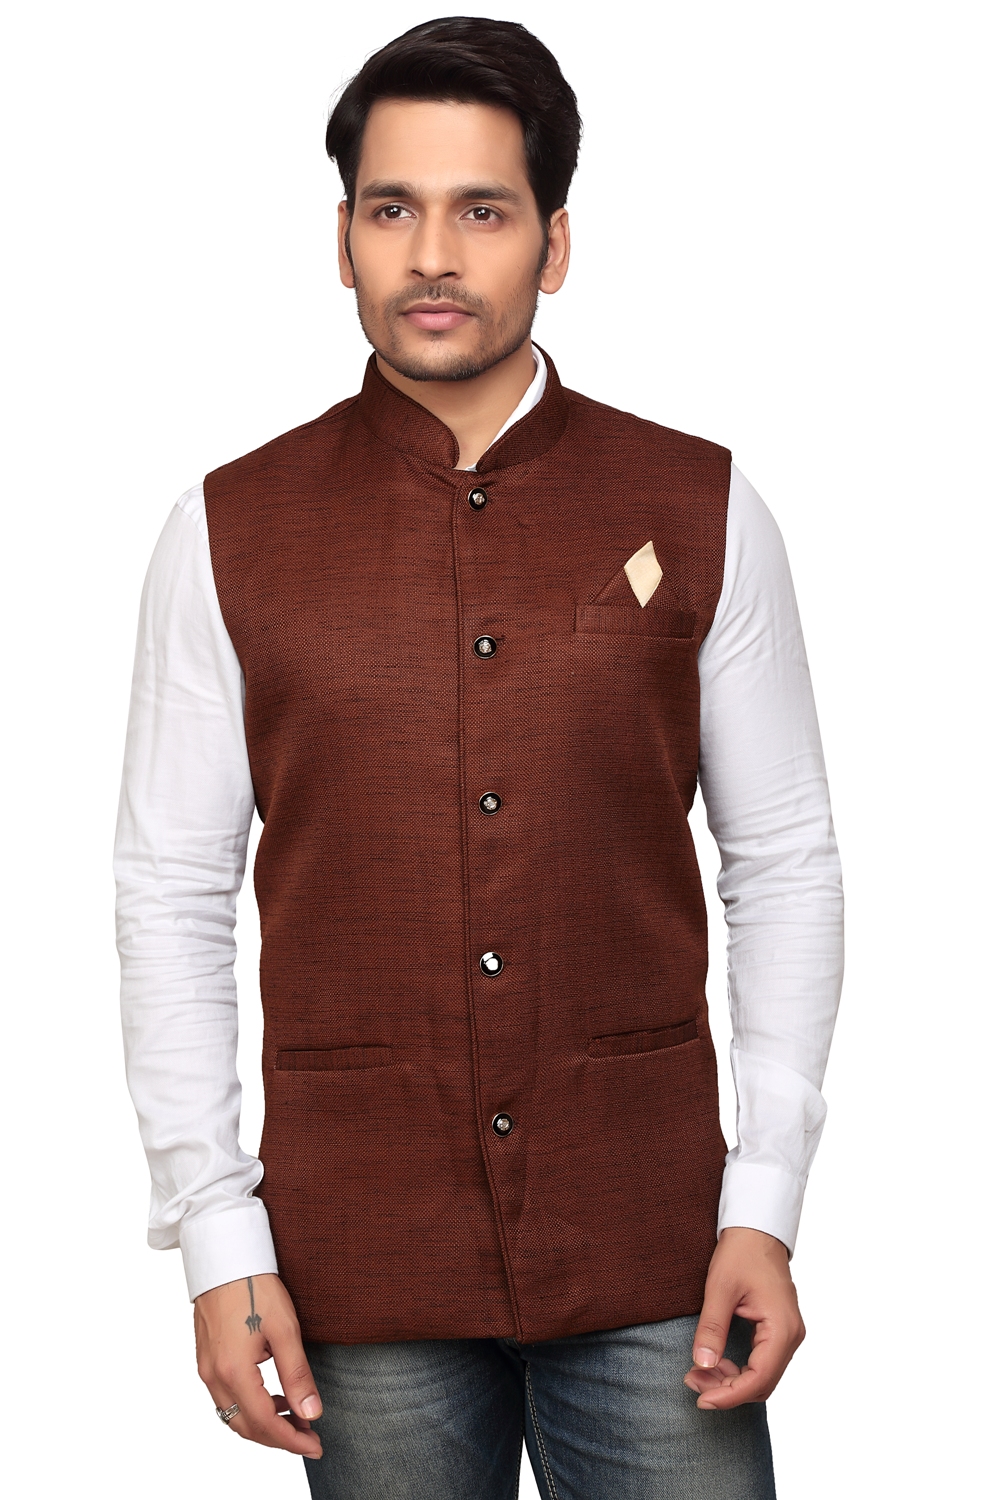 Buy Trustedsnap Nehru Jacket For Men ( Brown ) Online @ ₹999 from ShopClues